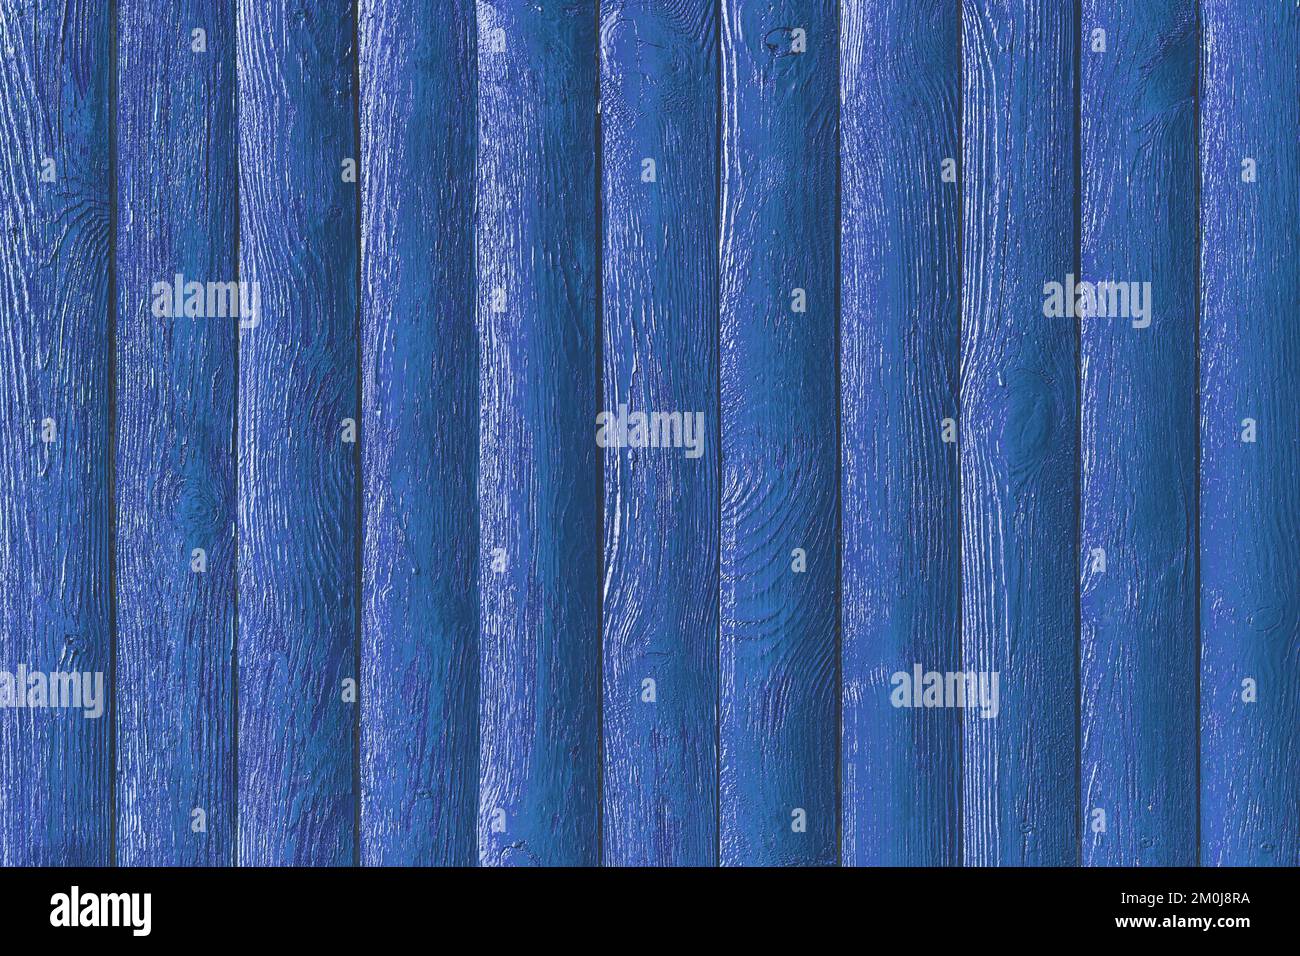 Blue paint on fence boards surface wooden texture plank background. Stock Photo